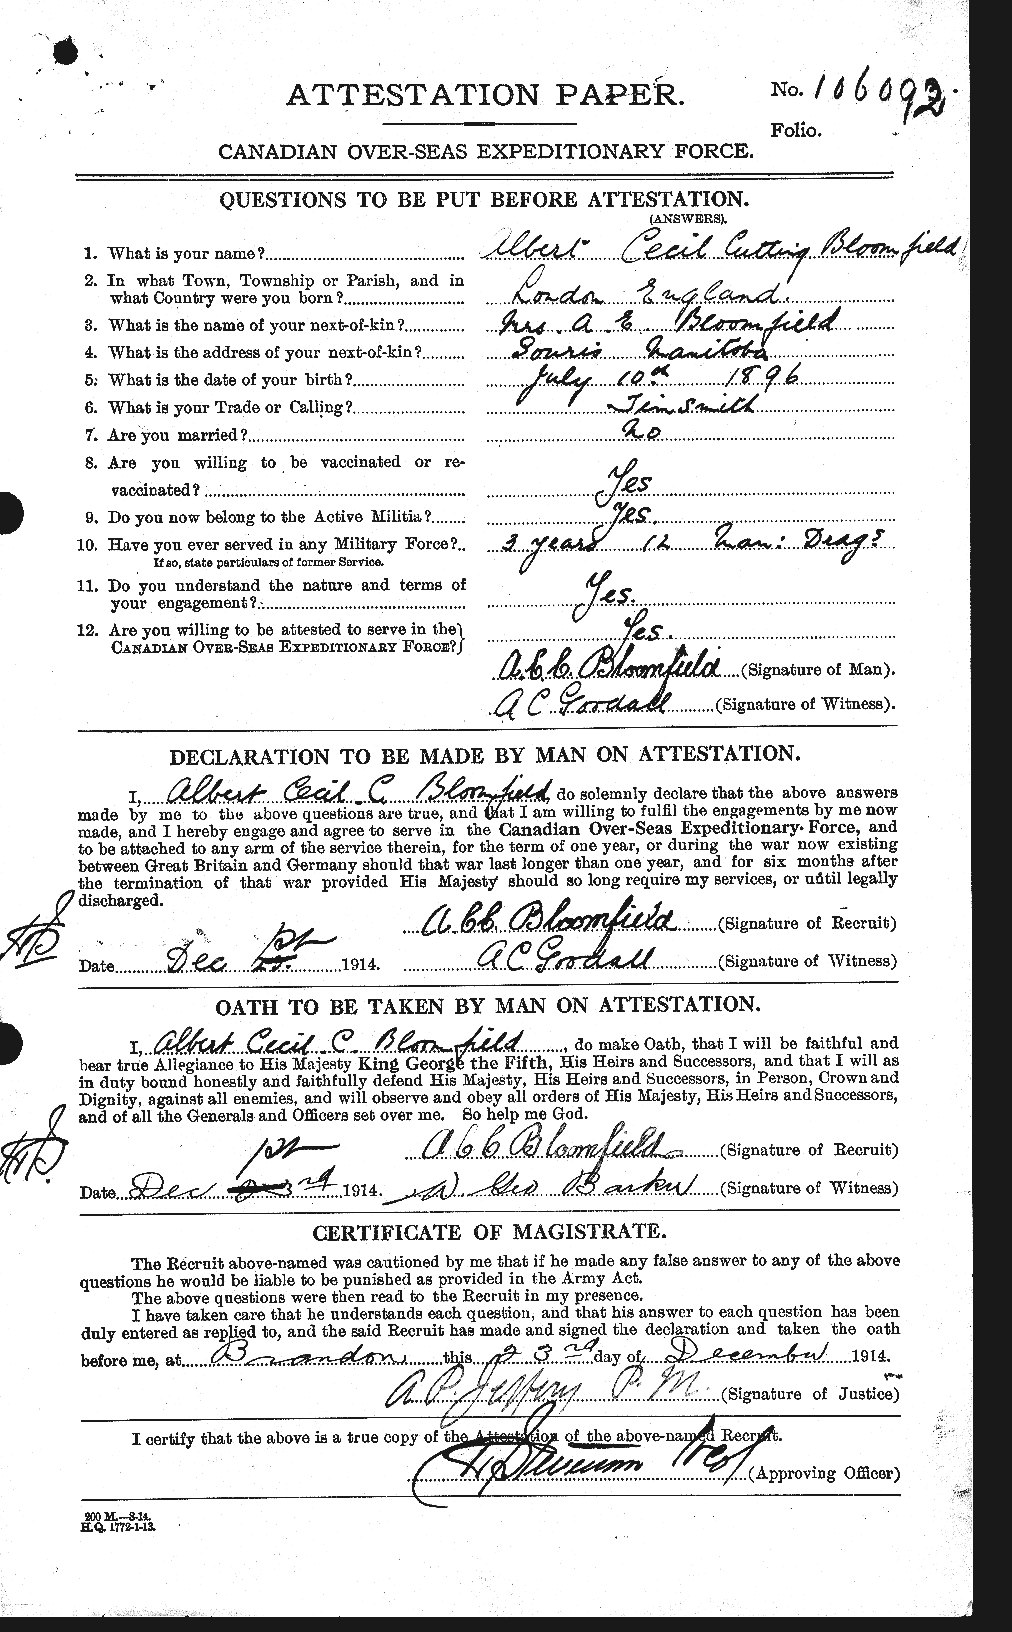 Personnel Records of the First World War - CEF 248599a